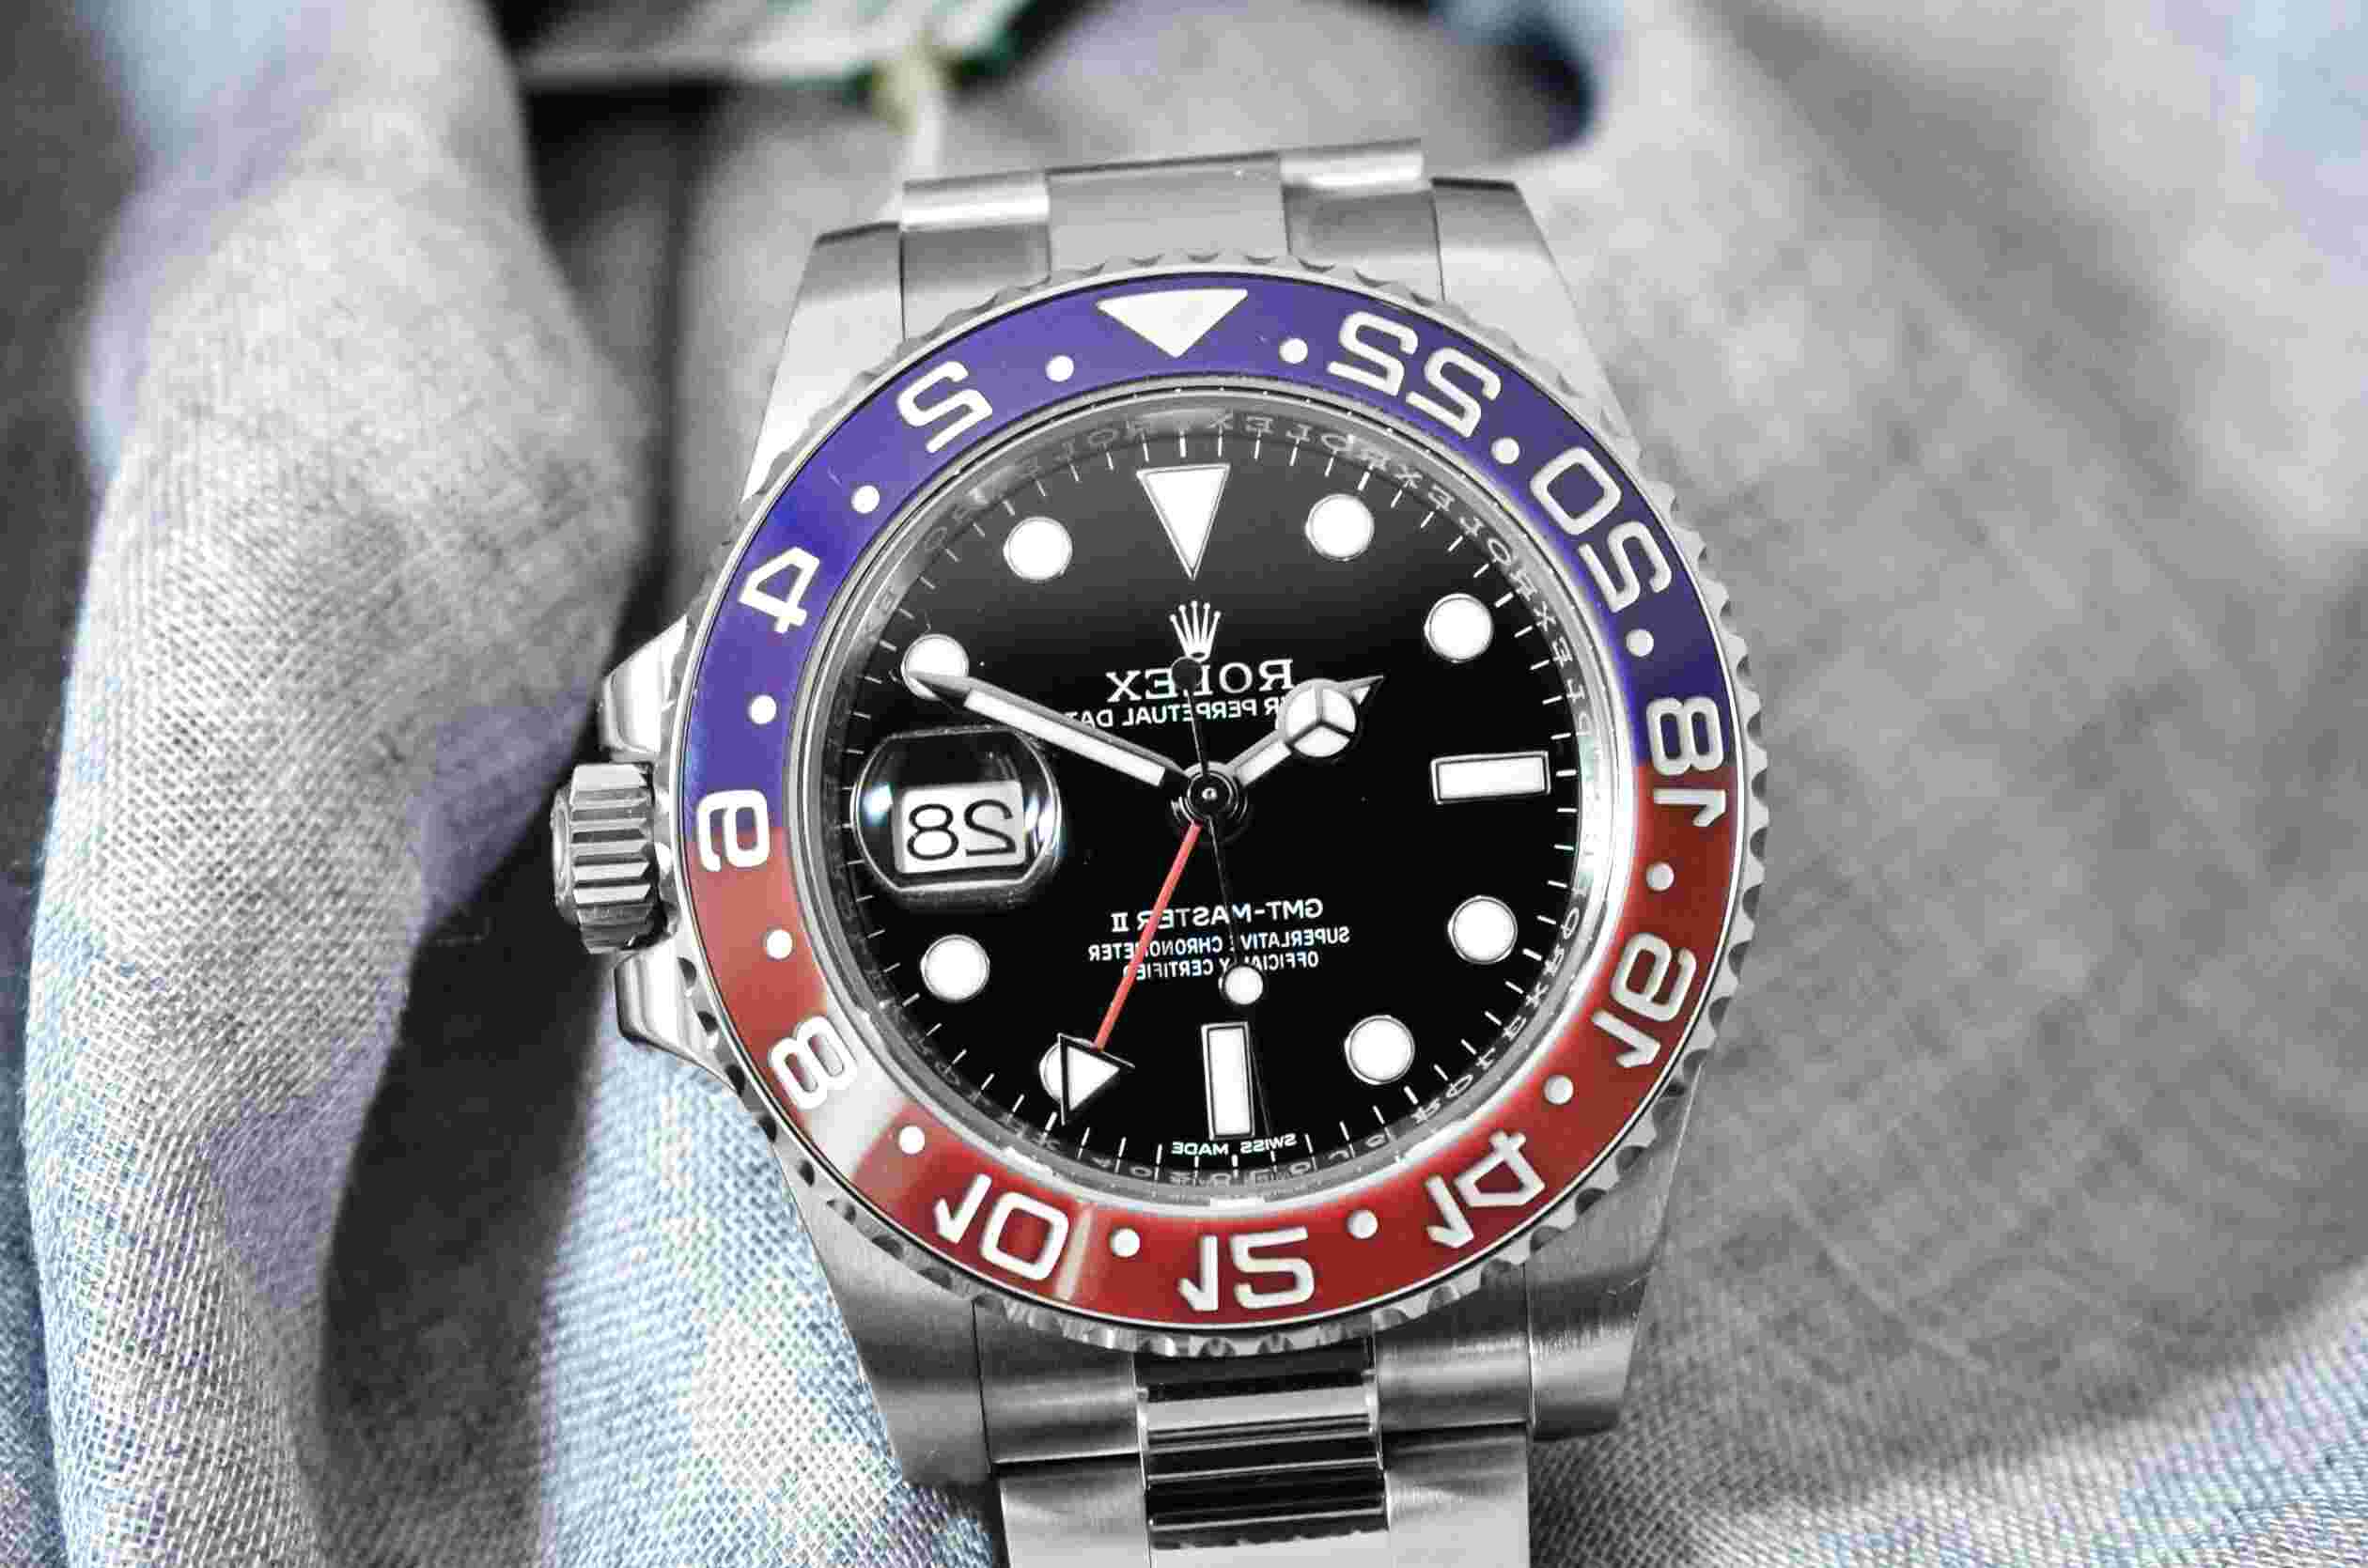 Rolex Gmt Pepsi for sale in UK 71 used Rolex Gmt Pepsis